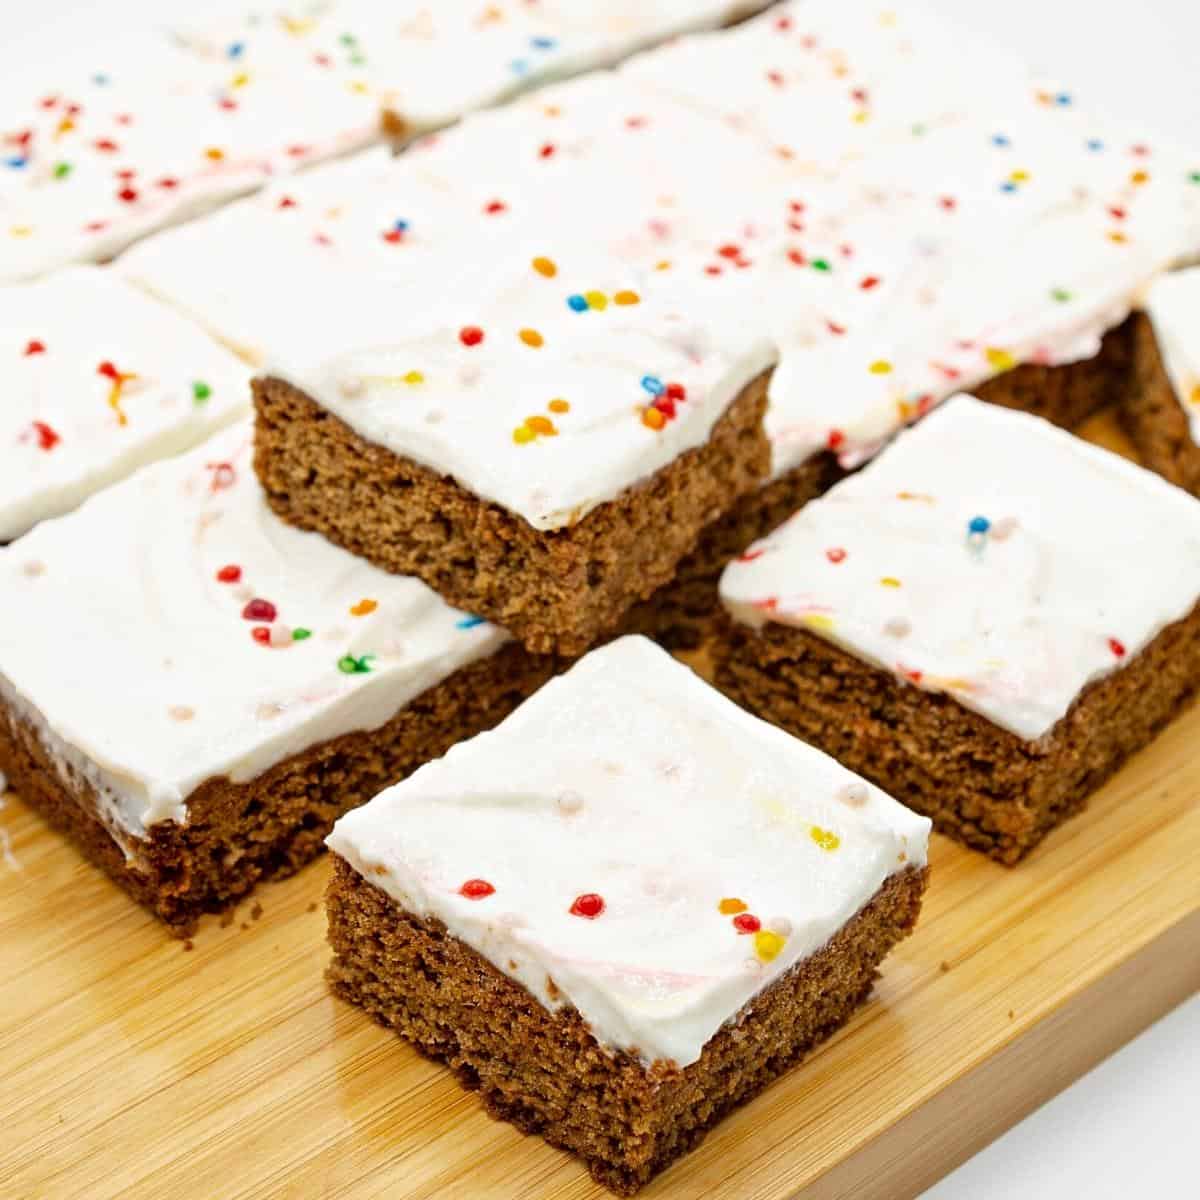 Gingerbread cookie bars on a wooden board.